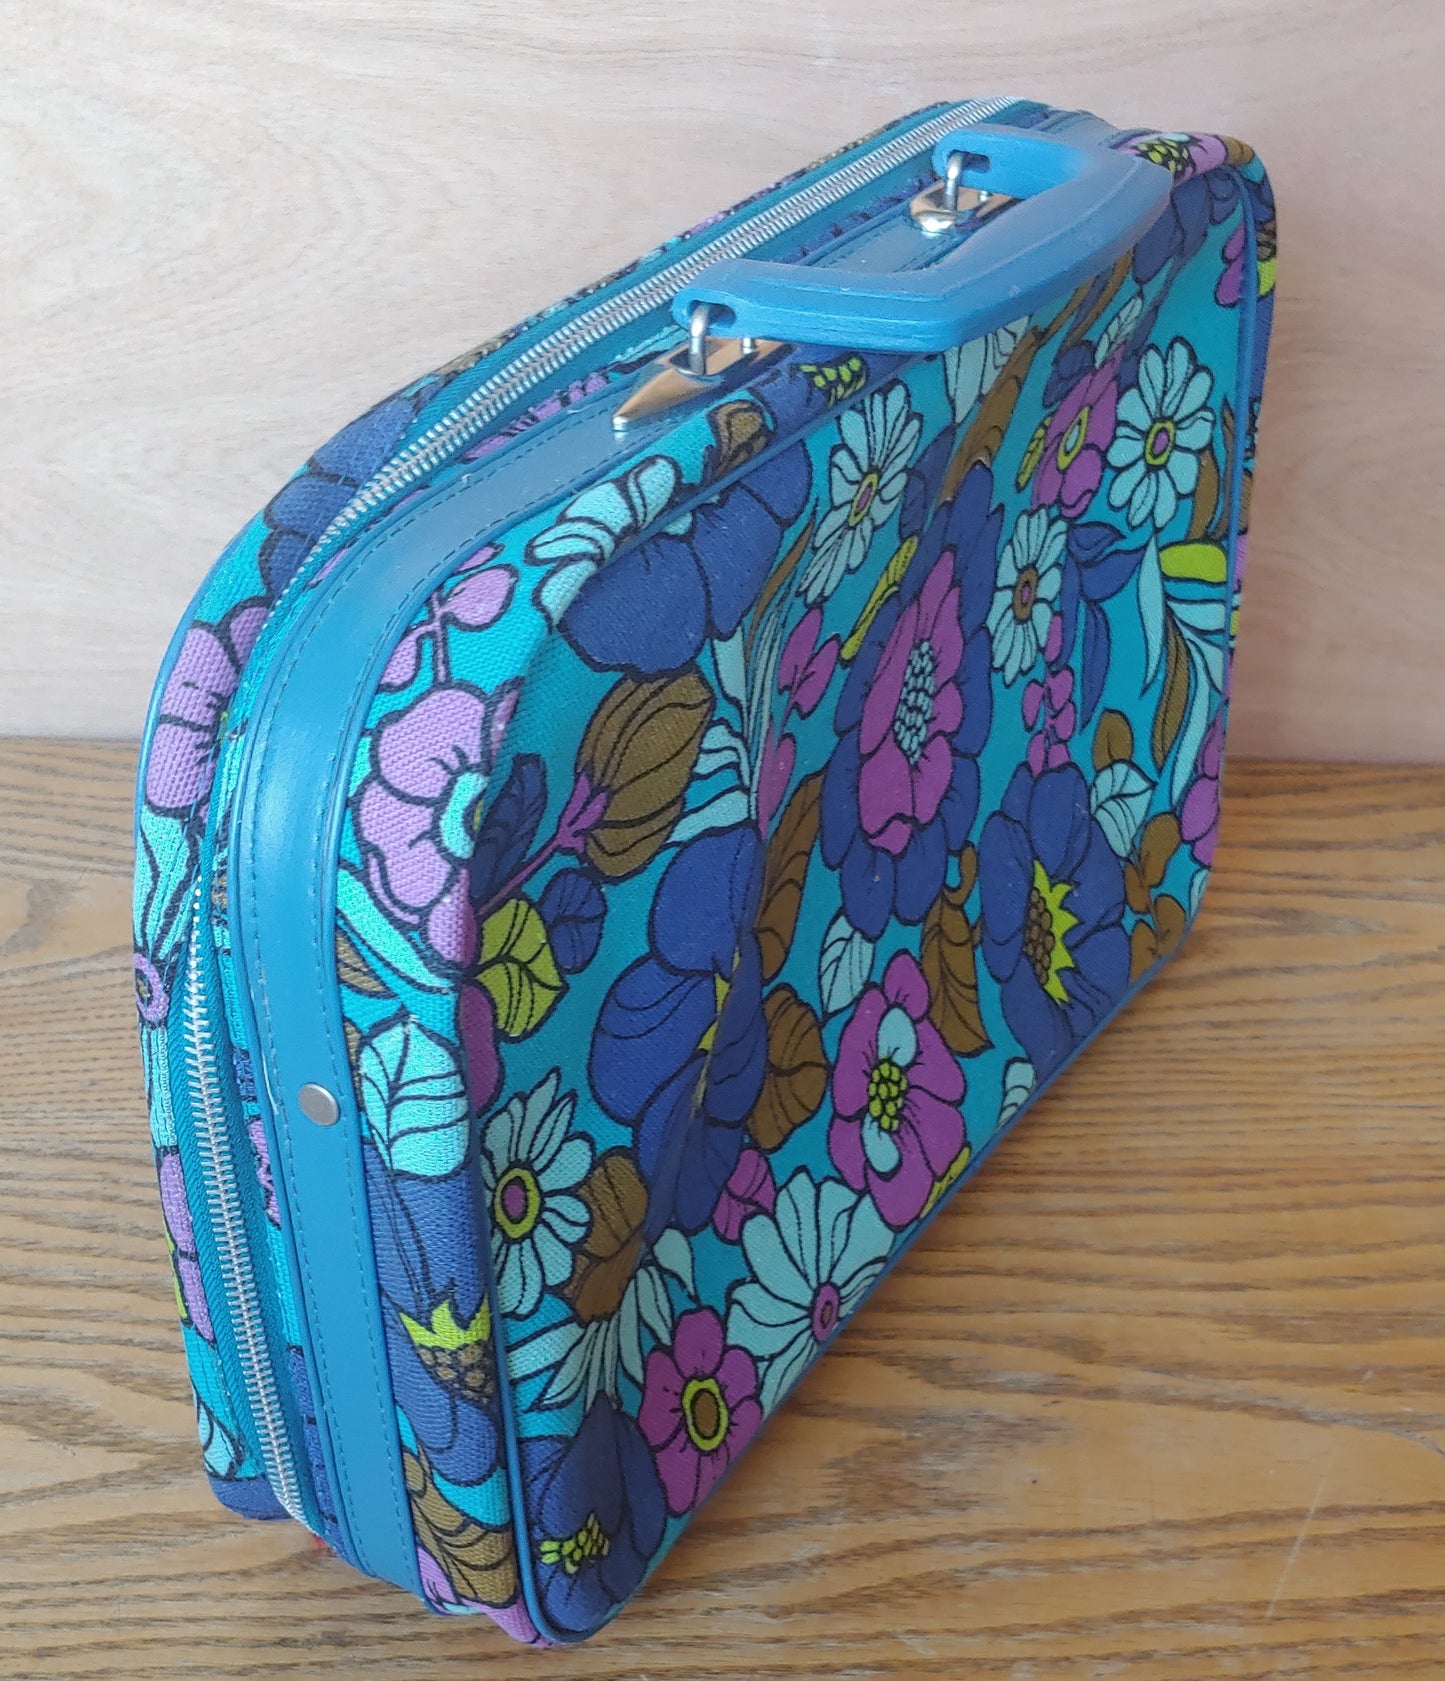 All Aboard! Vintage smaller floral luggage set retro 60's 70's